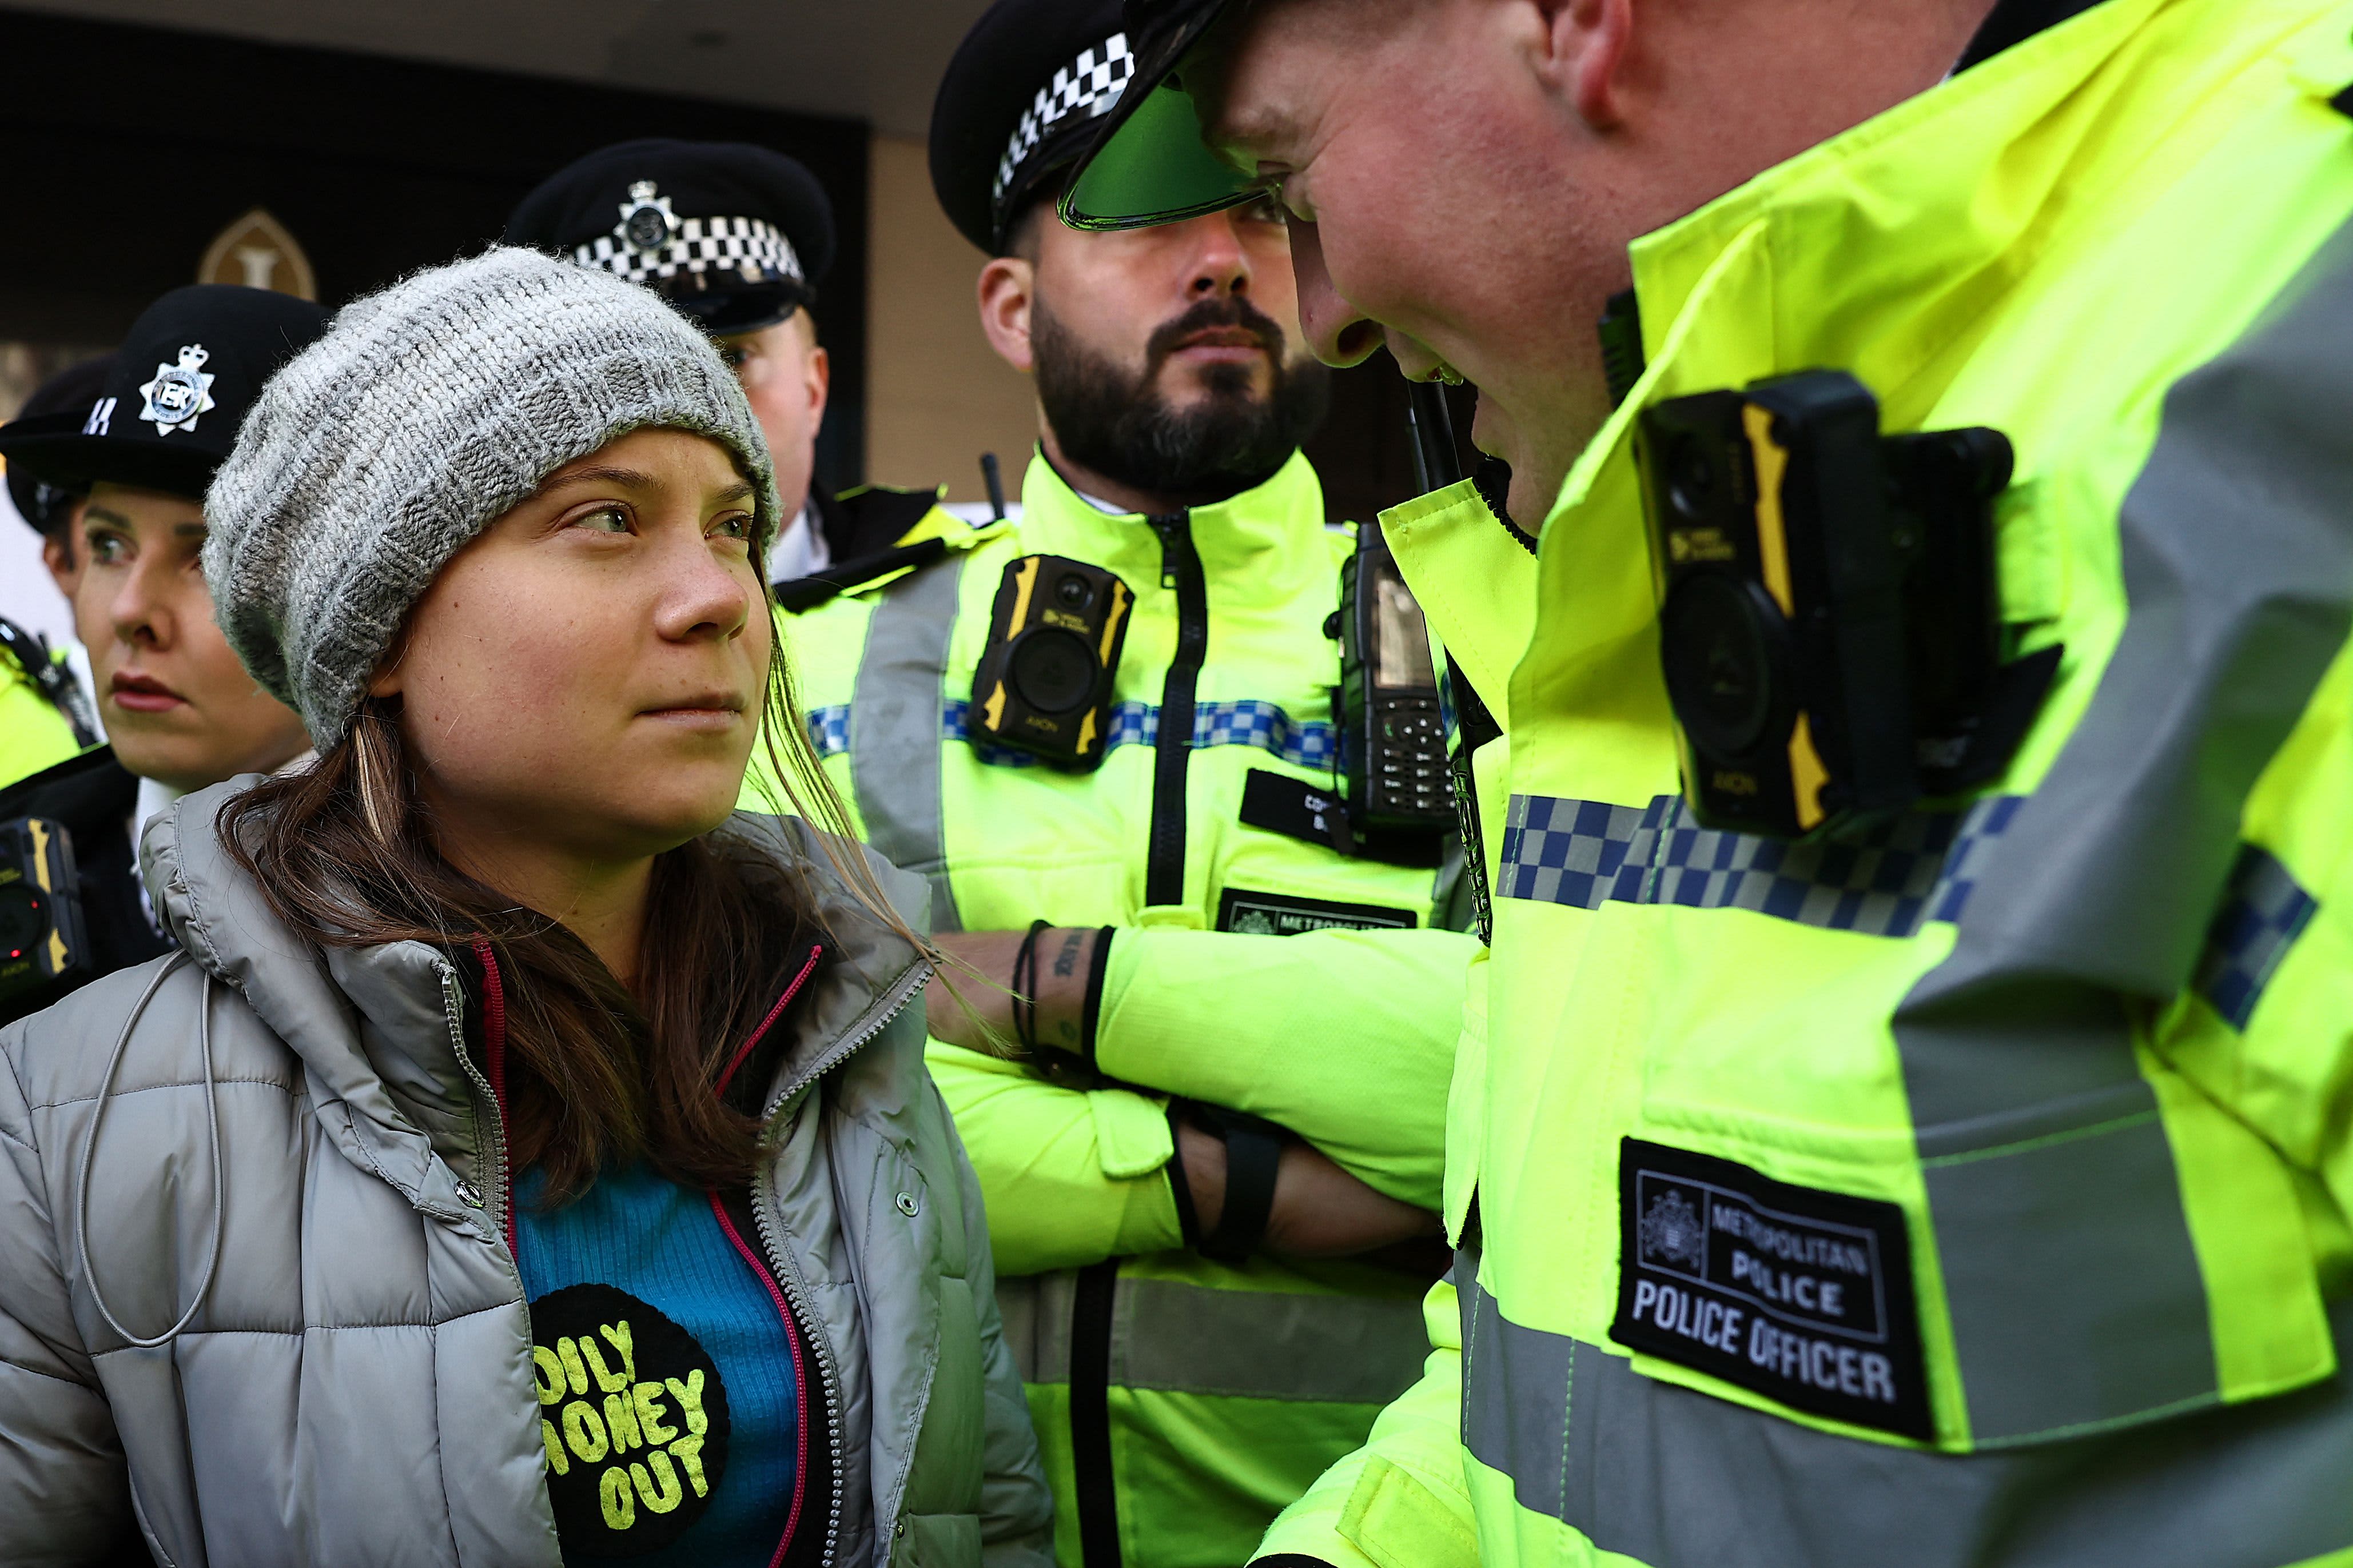 Climate activist Greta Thunberg is arrested during a protest in London